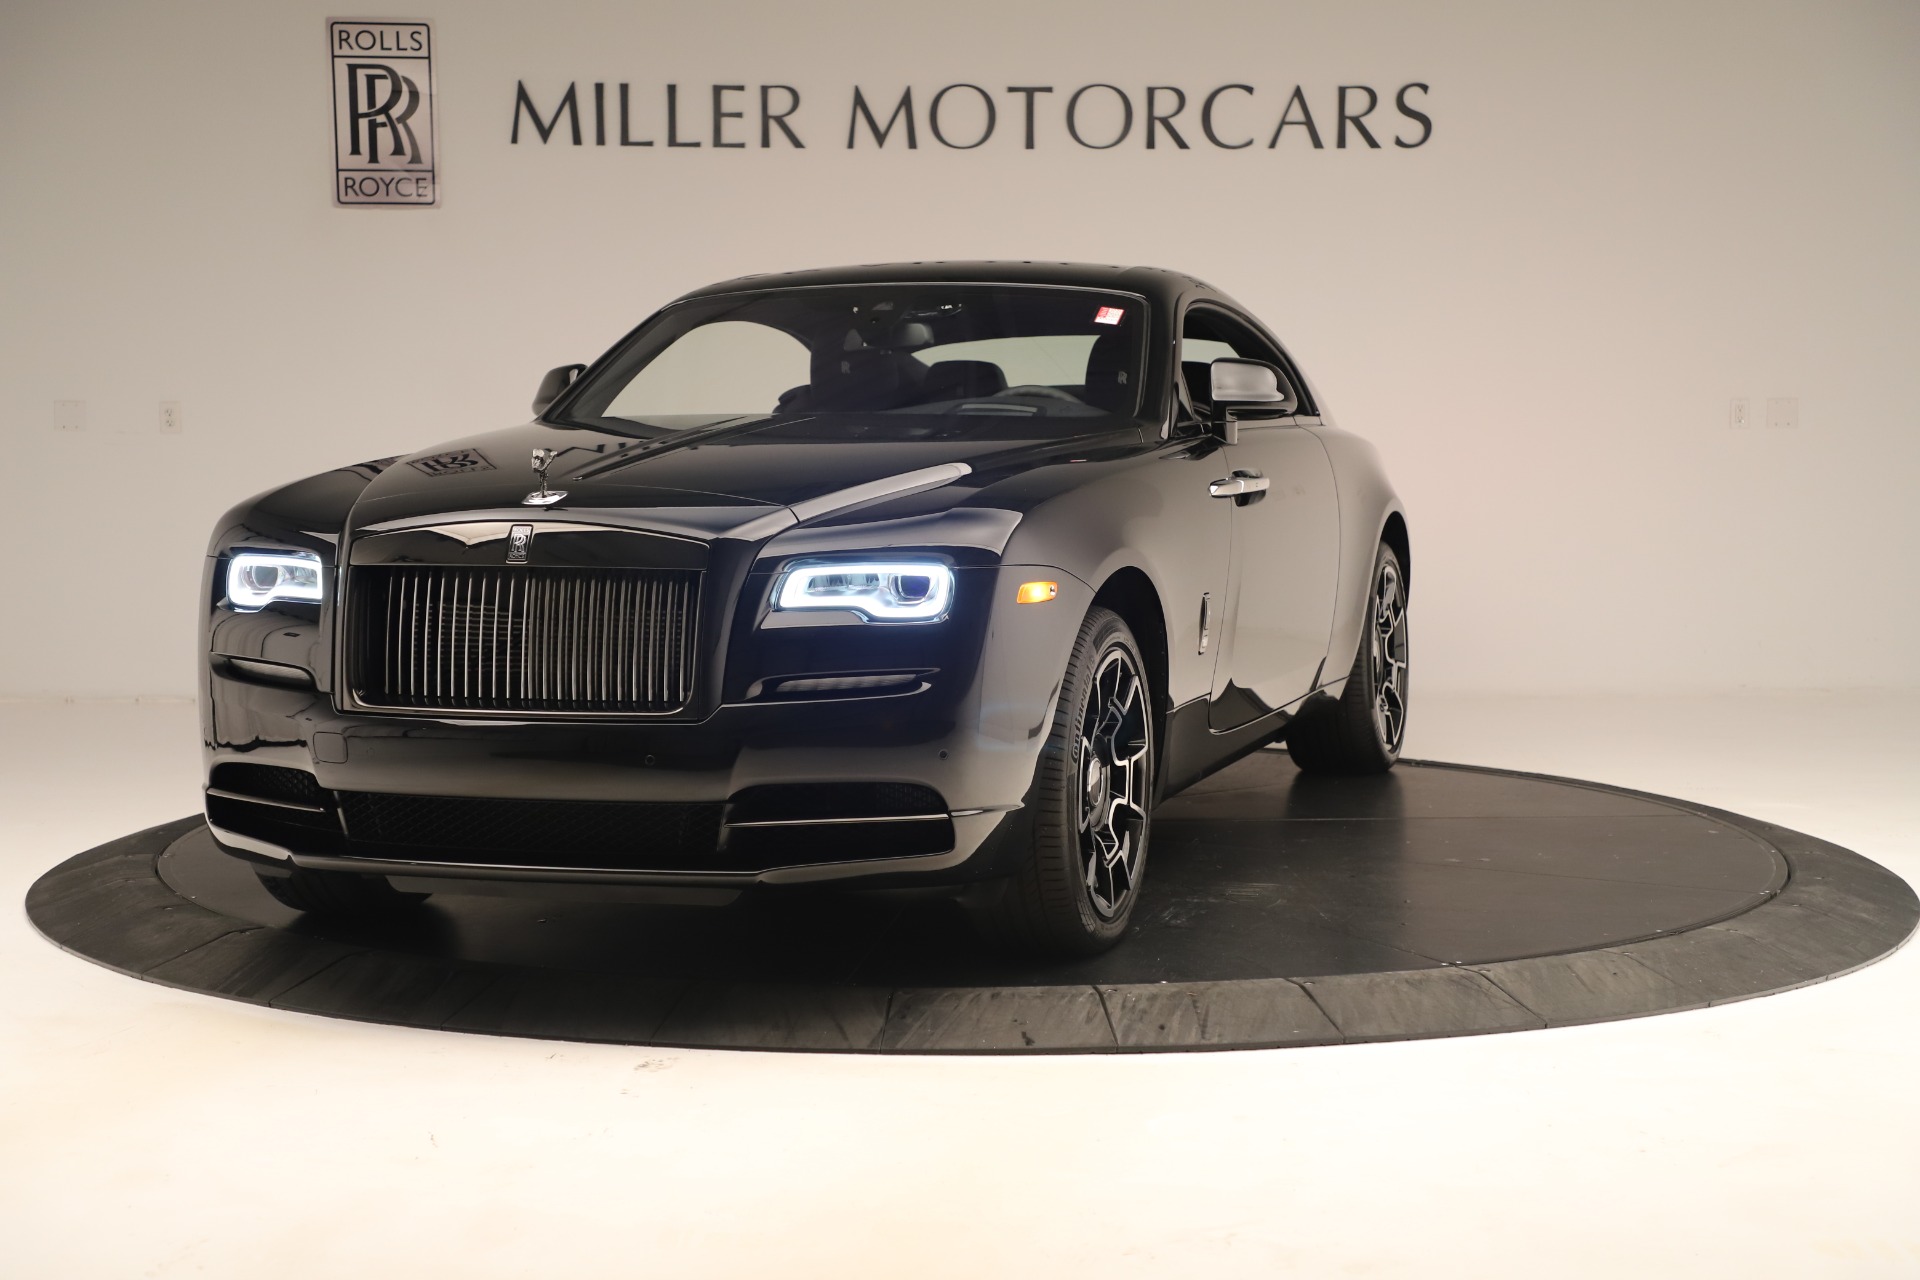 Production of RollsRoyce Wraith Dawn to end in 2023  HT Auto